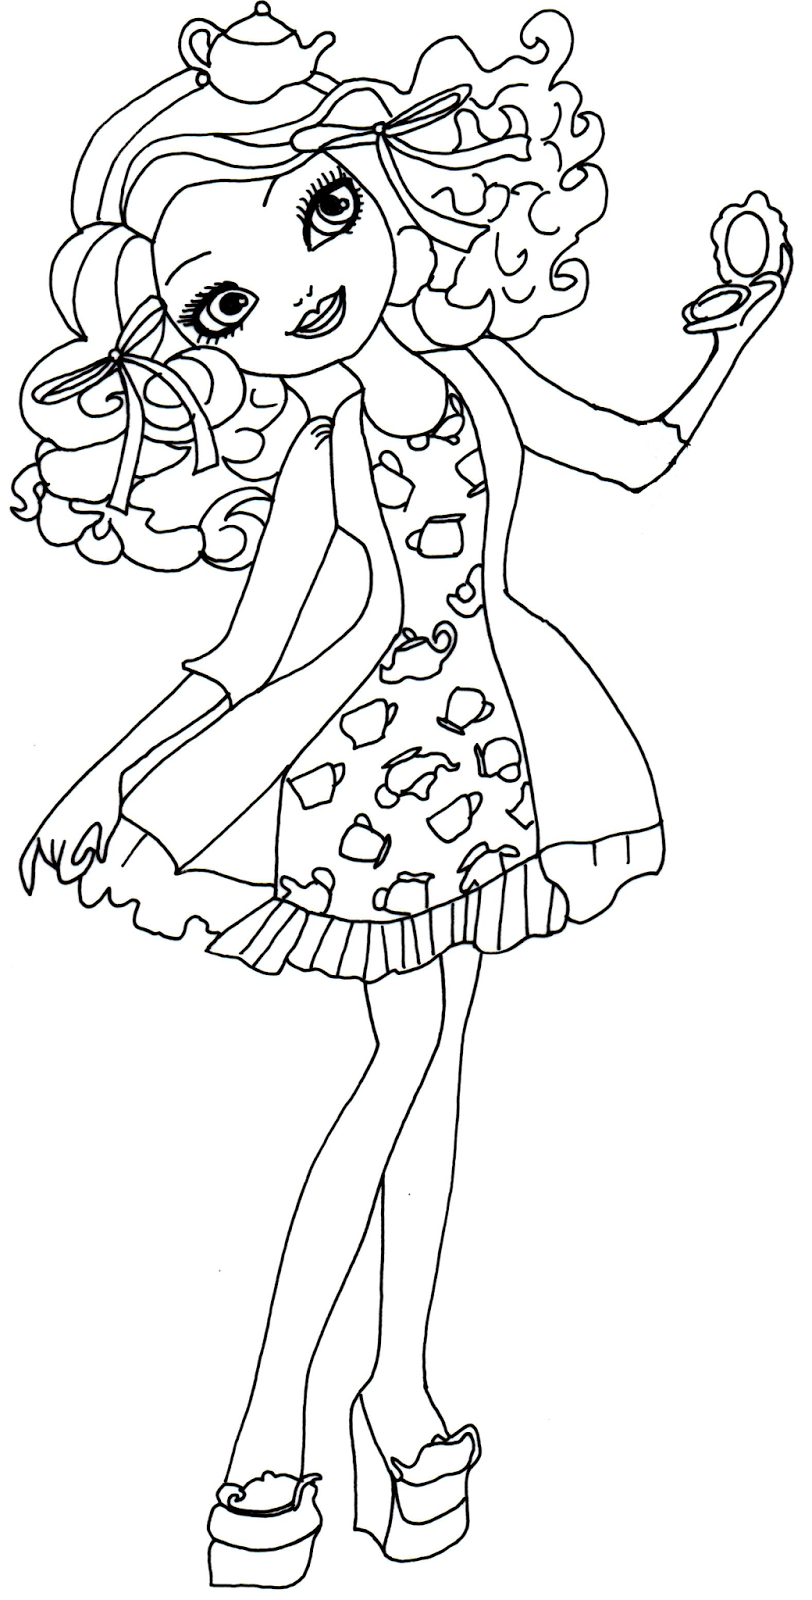 Free Printable Ever After High Coloring Pages: Madeline Hatter Getting